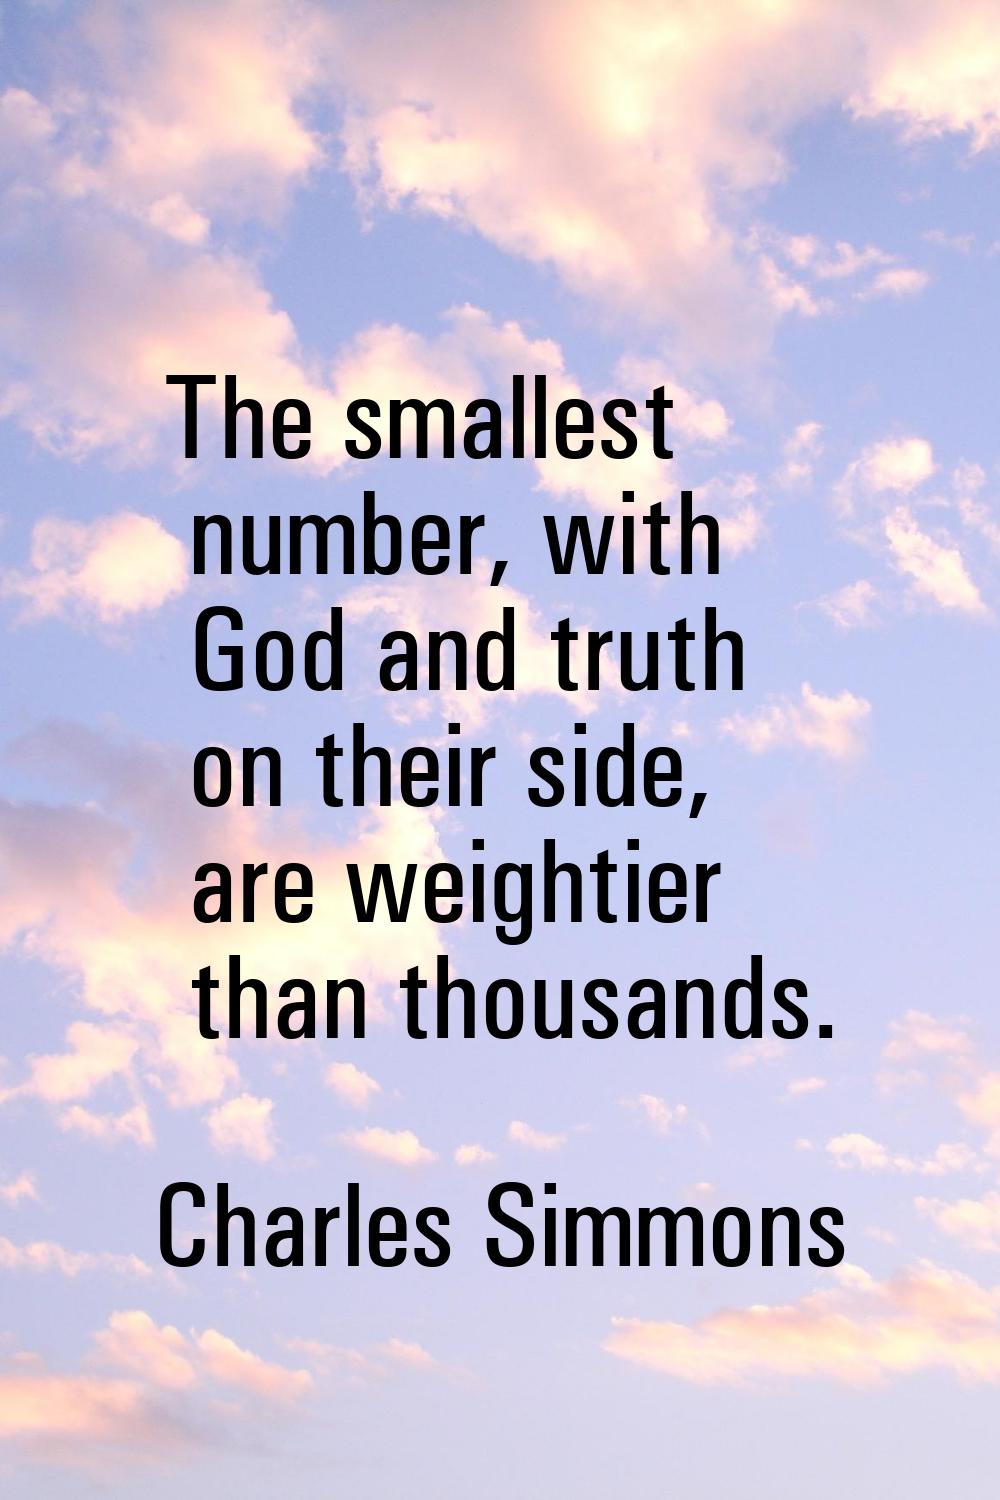 The smallest number, with God and truth on their side, are weightier than thousands.